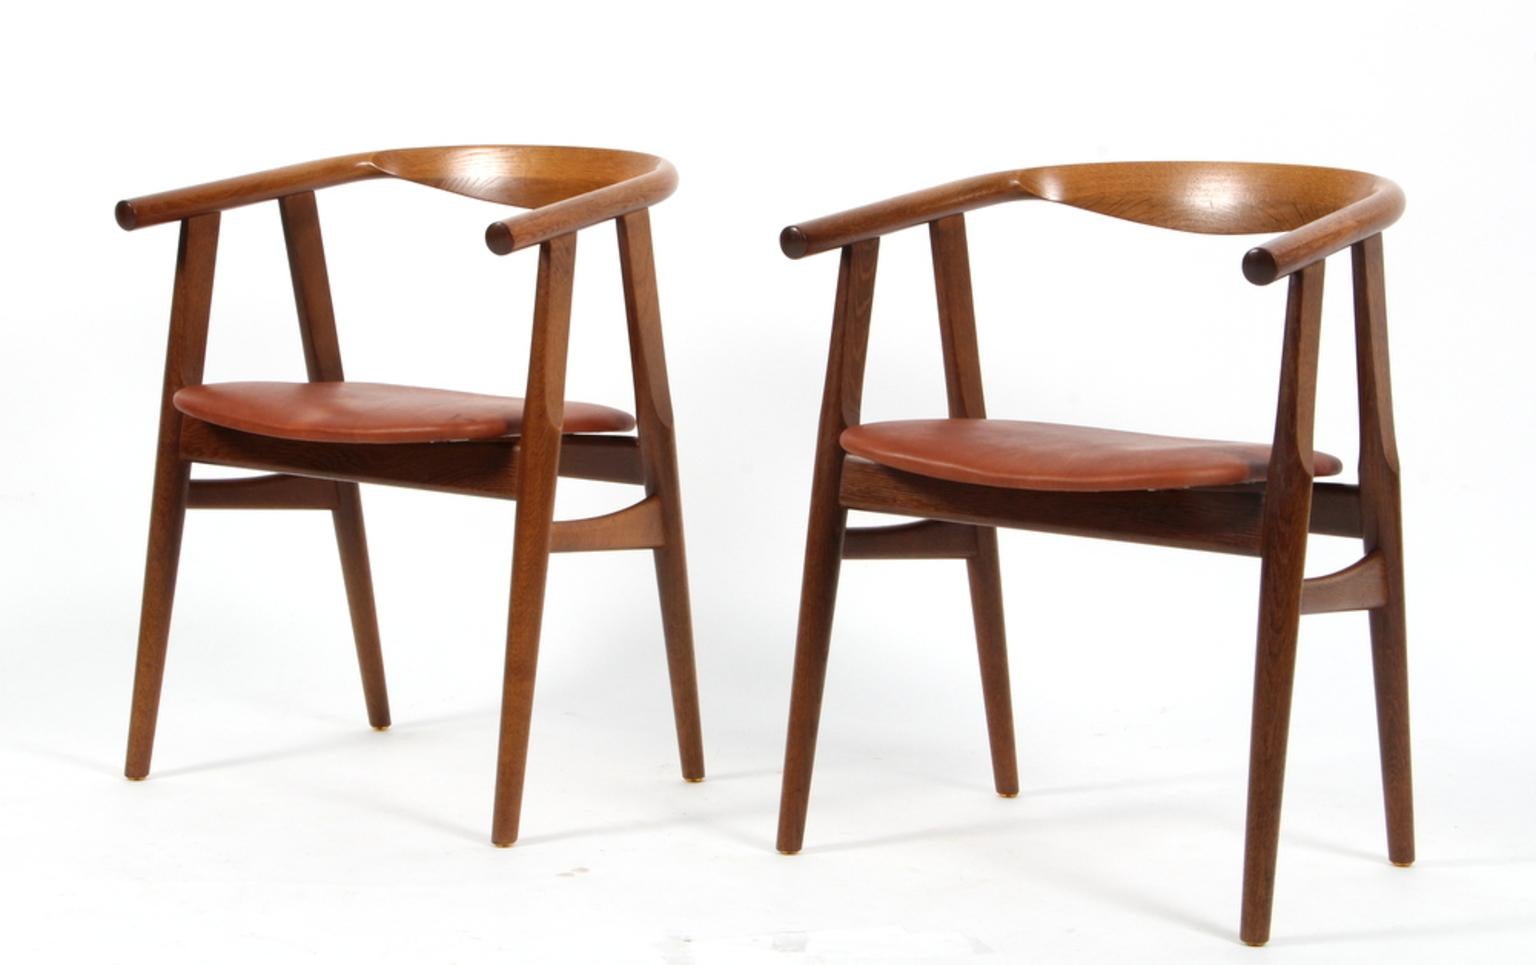 Hans J. Wegner armchairs in massive smoked oak.

New upholstered with cognac aniline leather.

Model GE-525, made by GETAMA.

Three chairs in total.